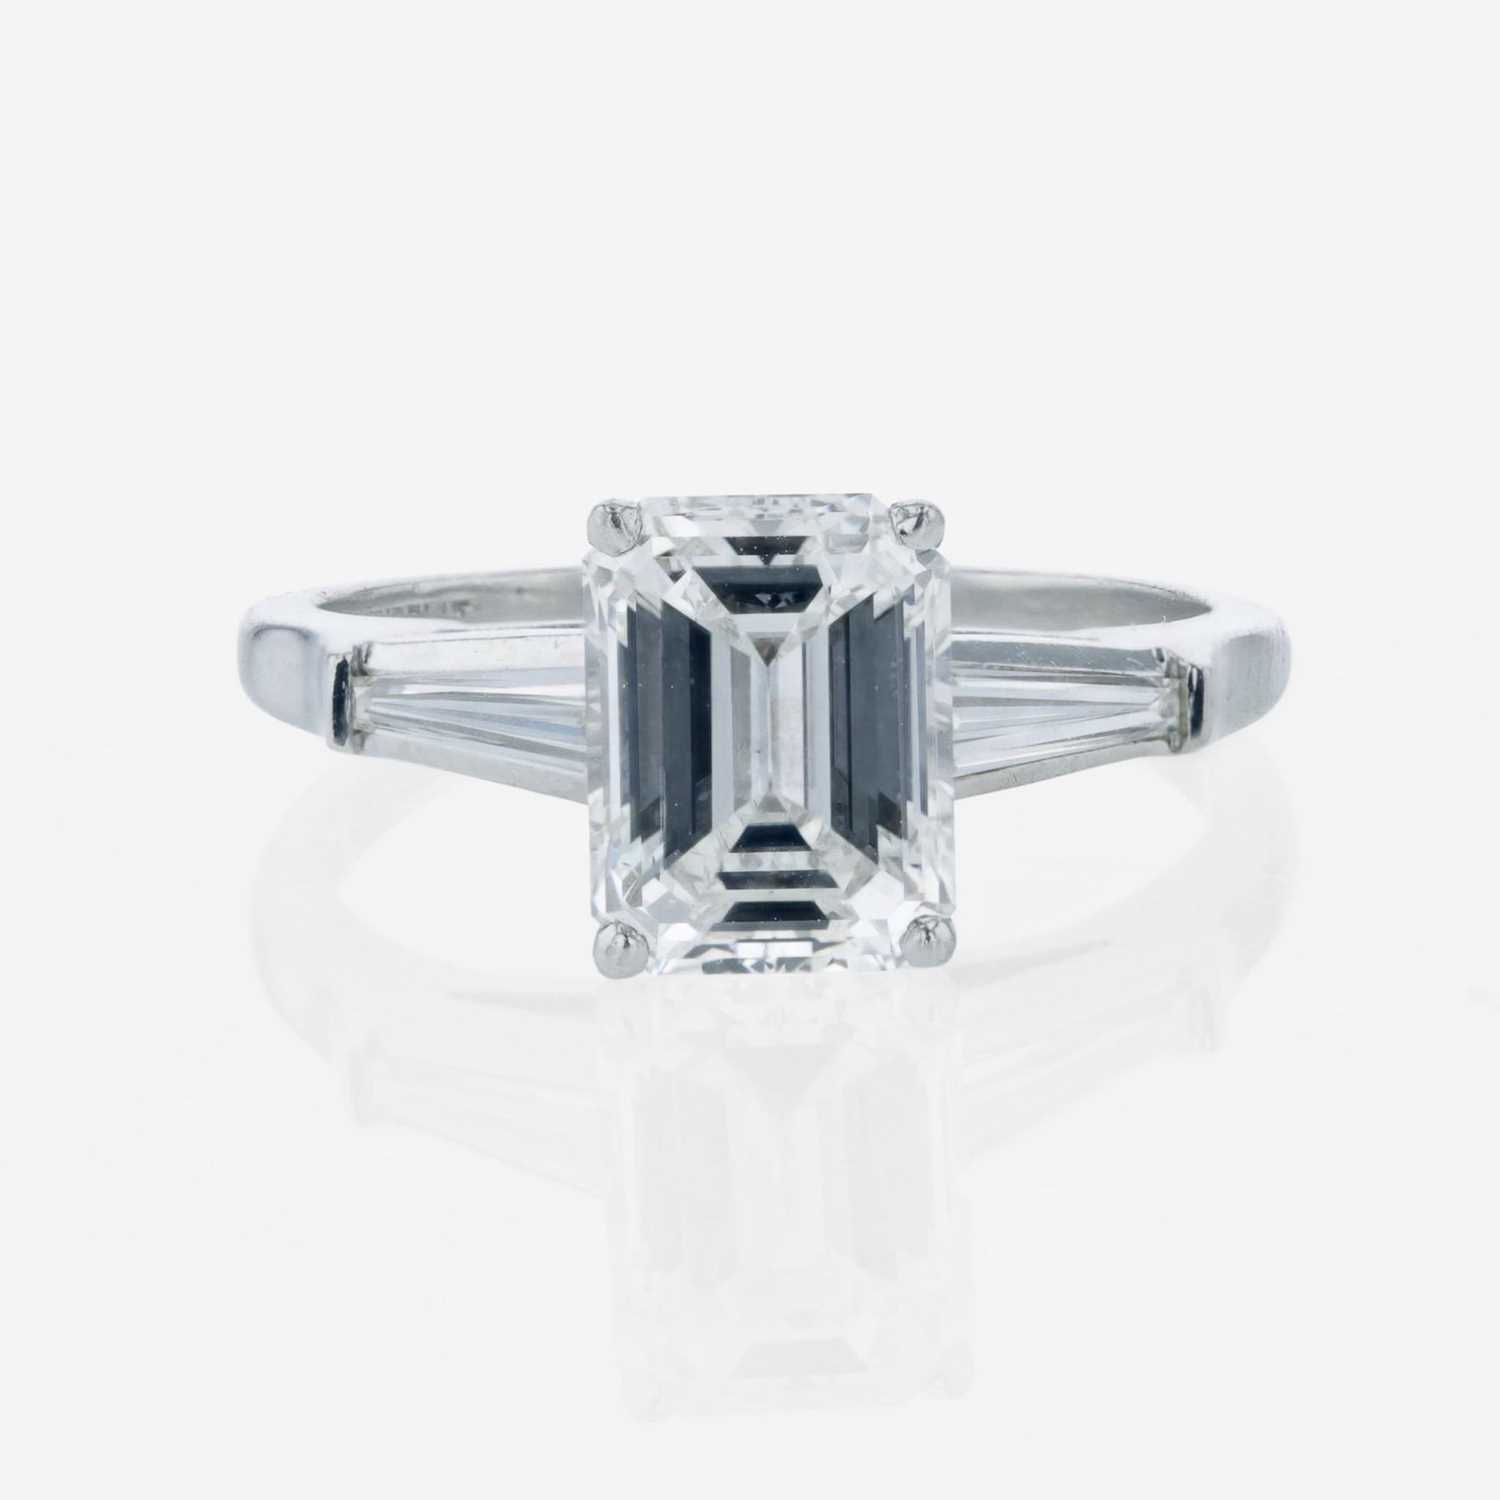 Lot 86 - An emerald-cut diamond accented solitaire ring